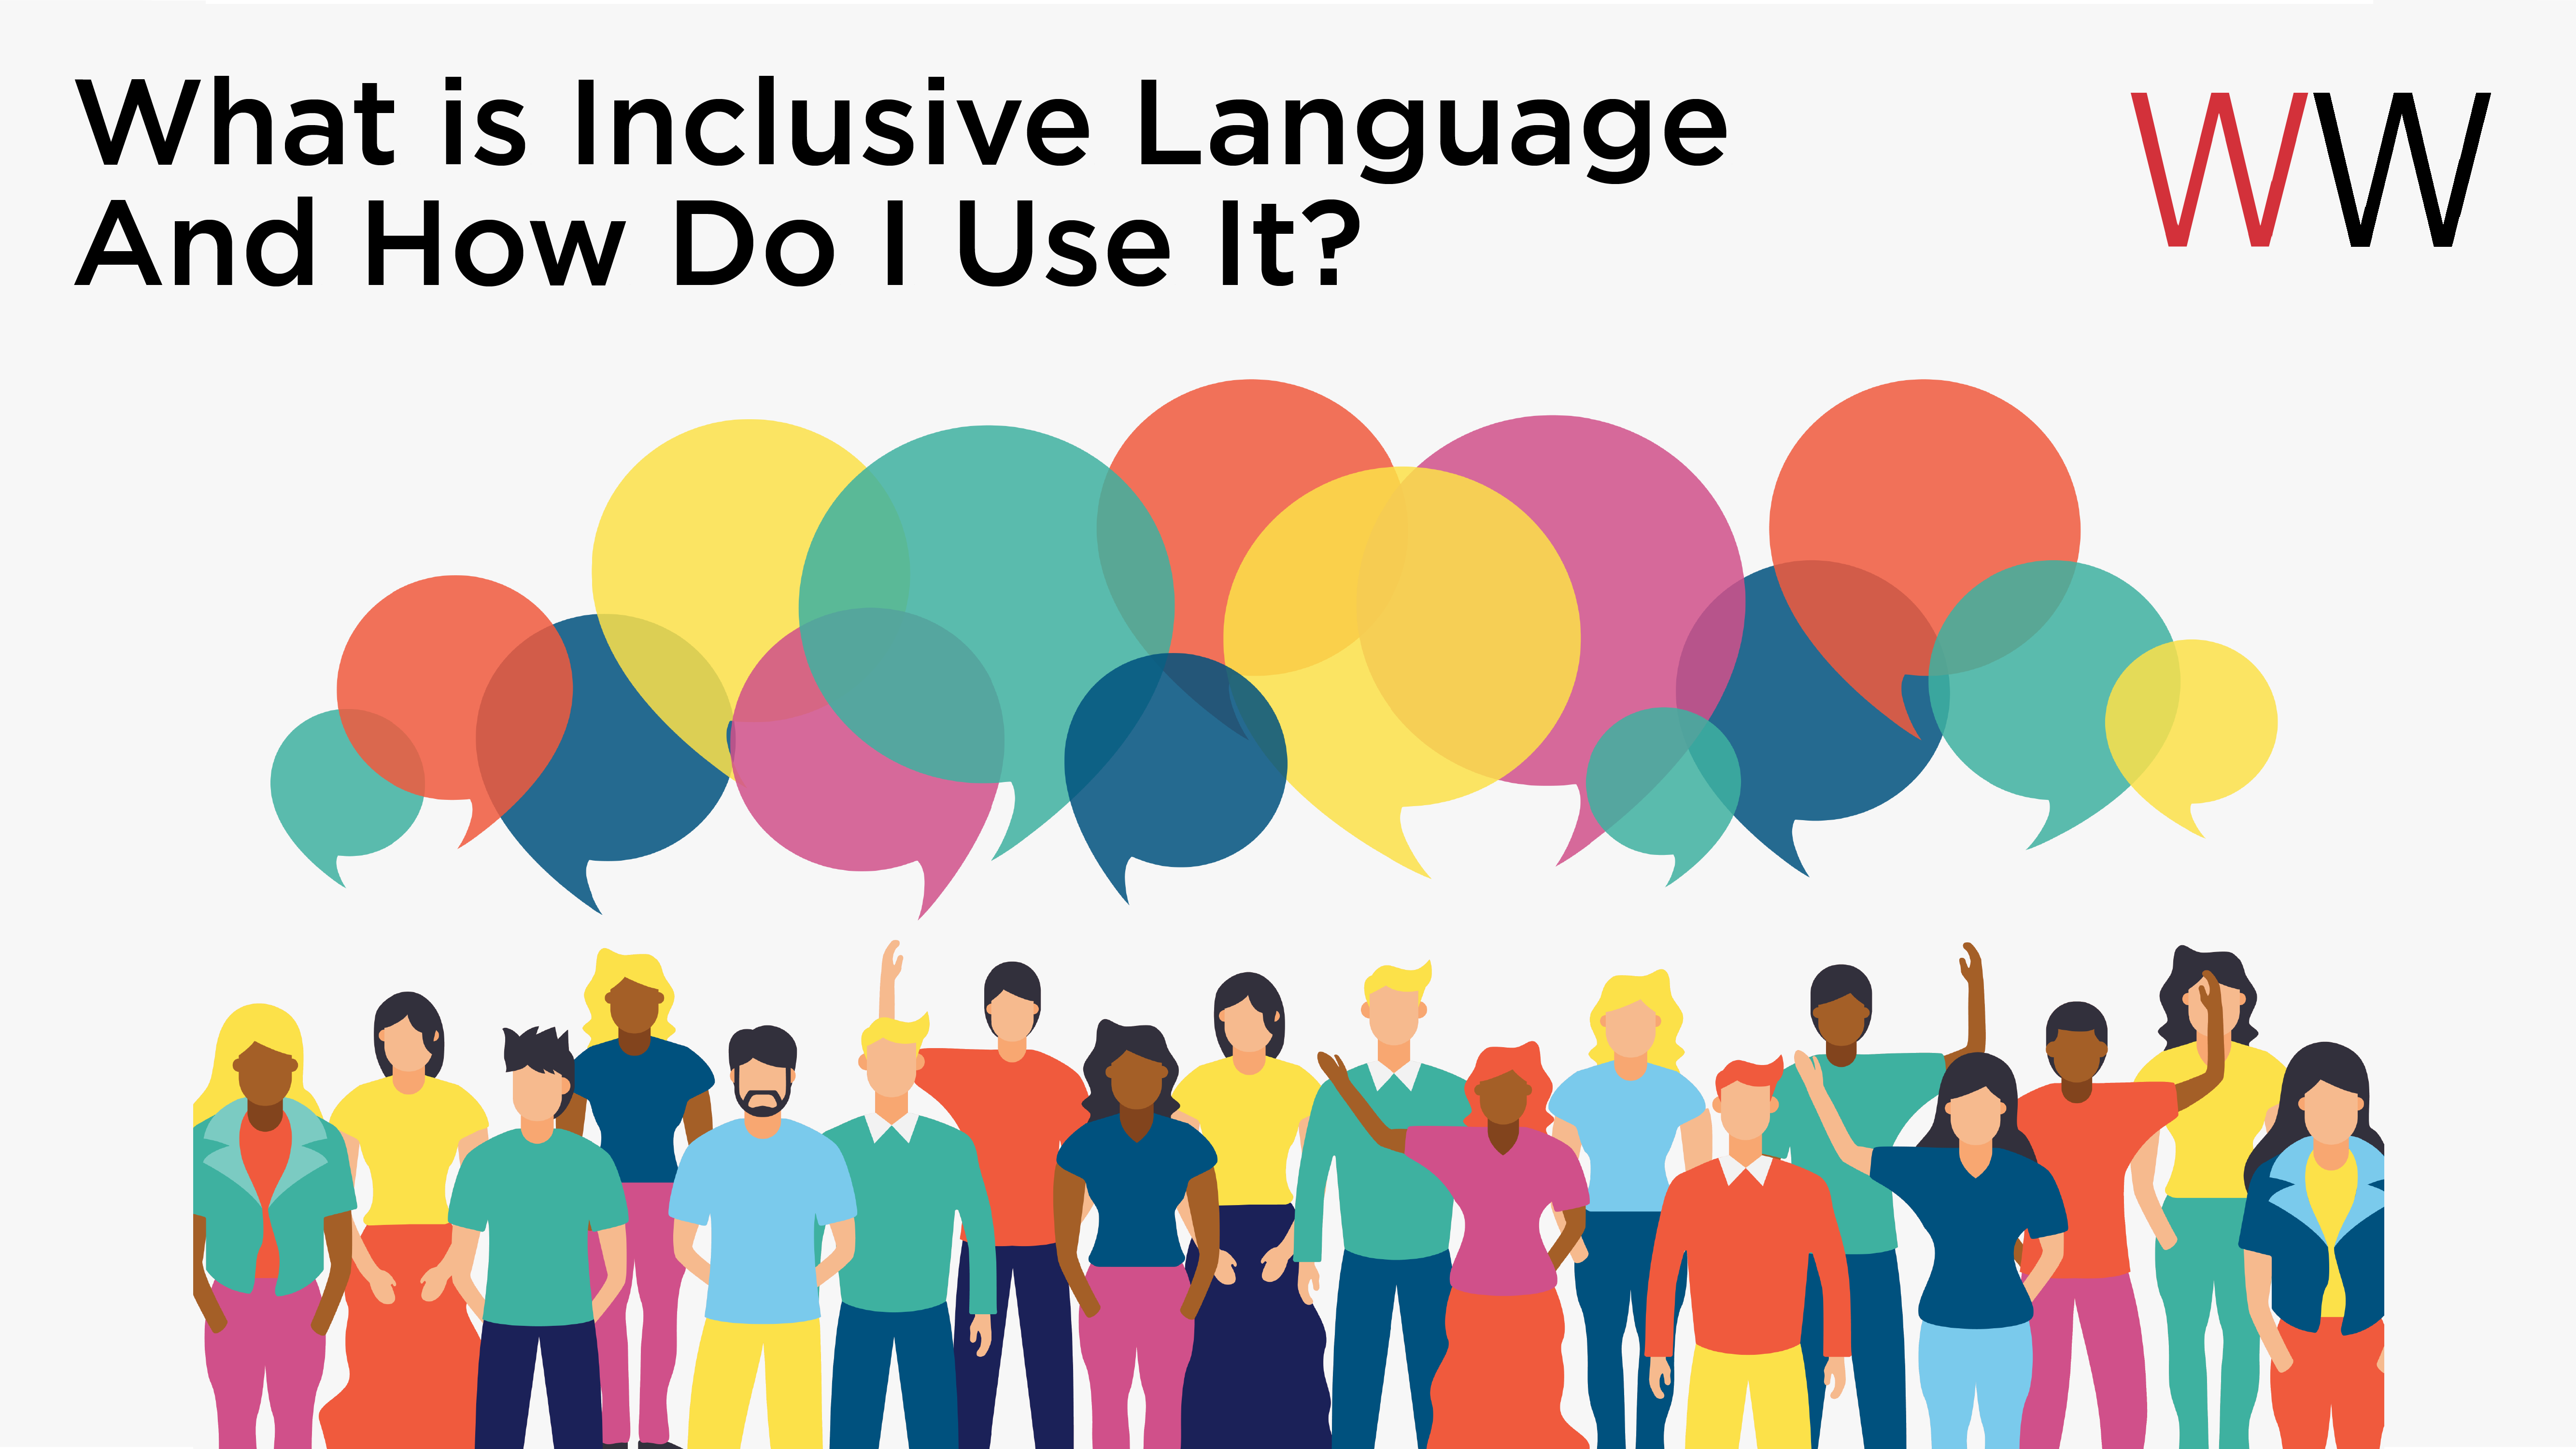 What is Inclusive Language and How Do I Use It?